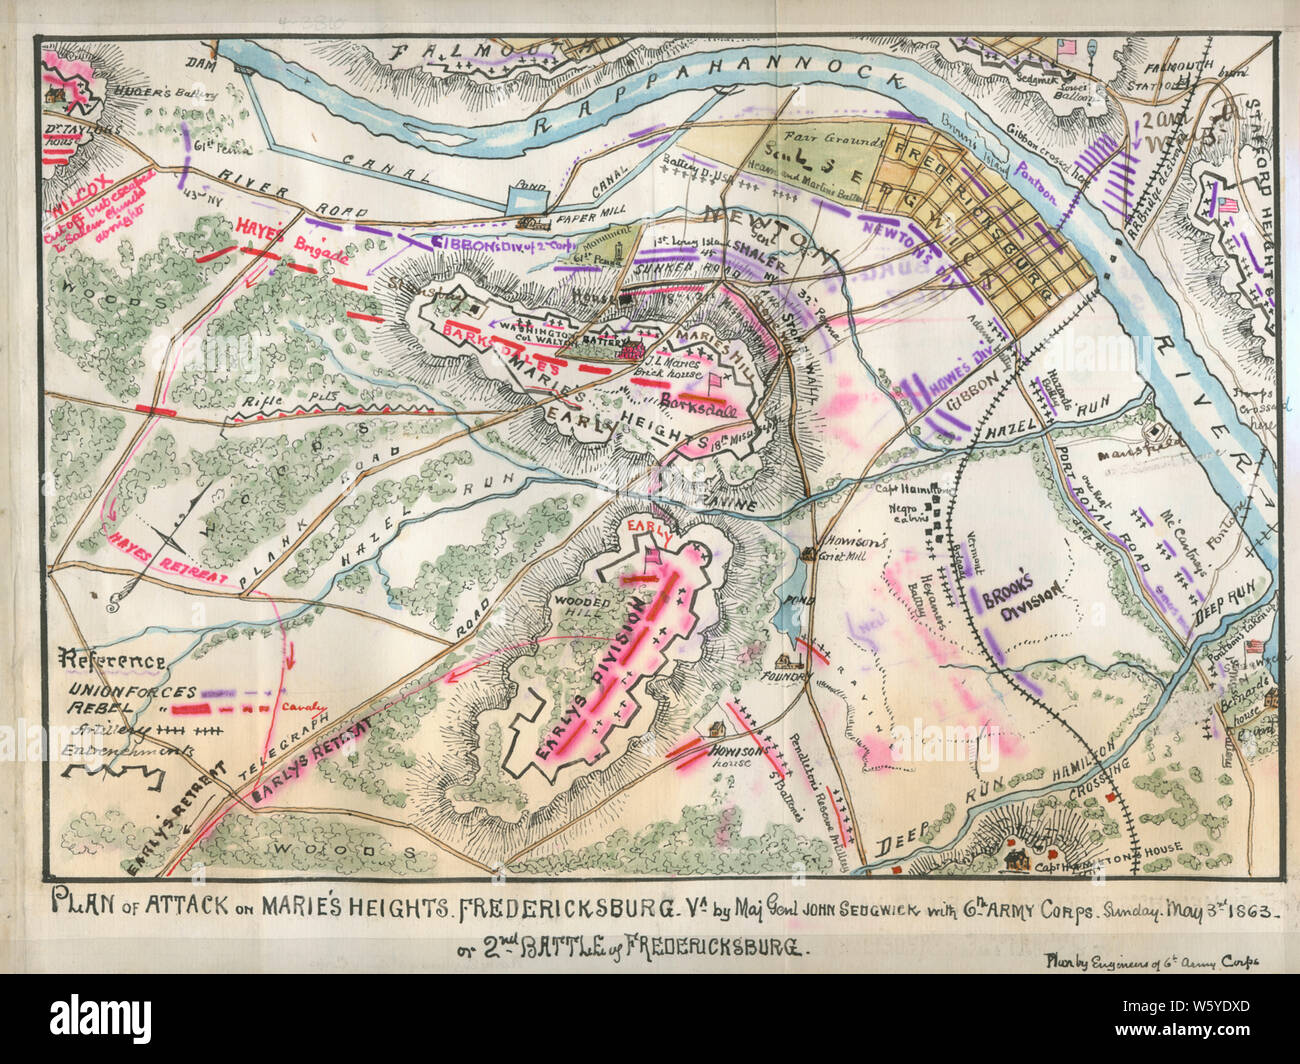 Civil War Maps 1304 Plan of attack on Marie's Heights Fredericksburg Va or 2nd Battle of Fredericksburg By Maj Genl John Sedgwick with 6th Army Corps Sunday May 3rd 1863 Rebuild and Repair Stock Photo